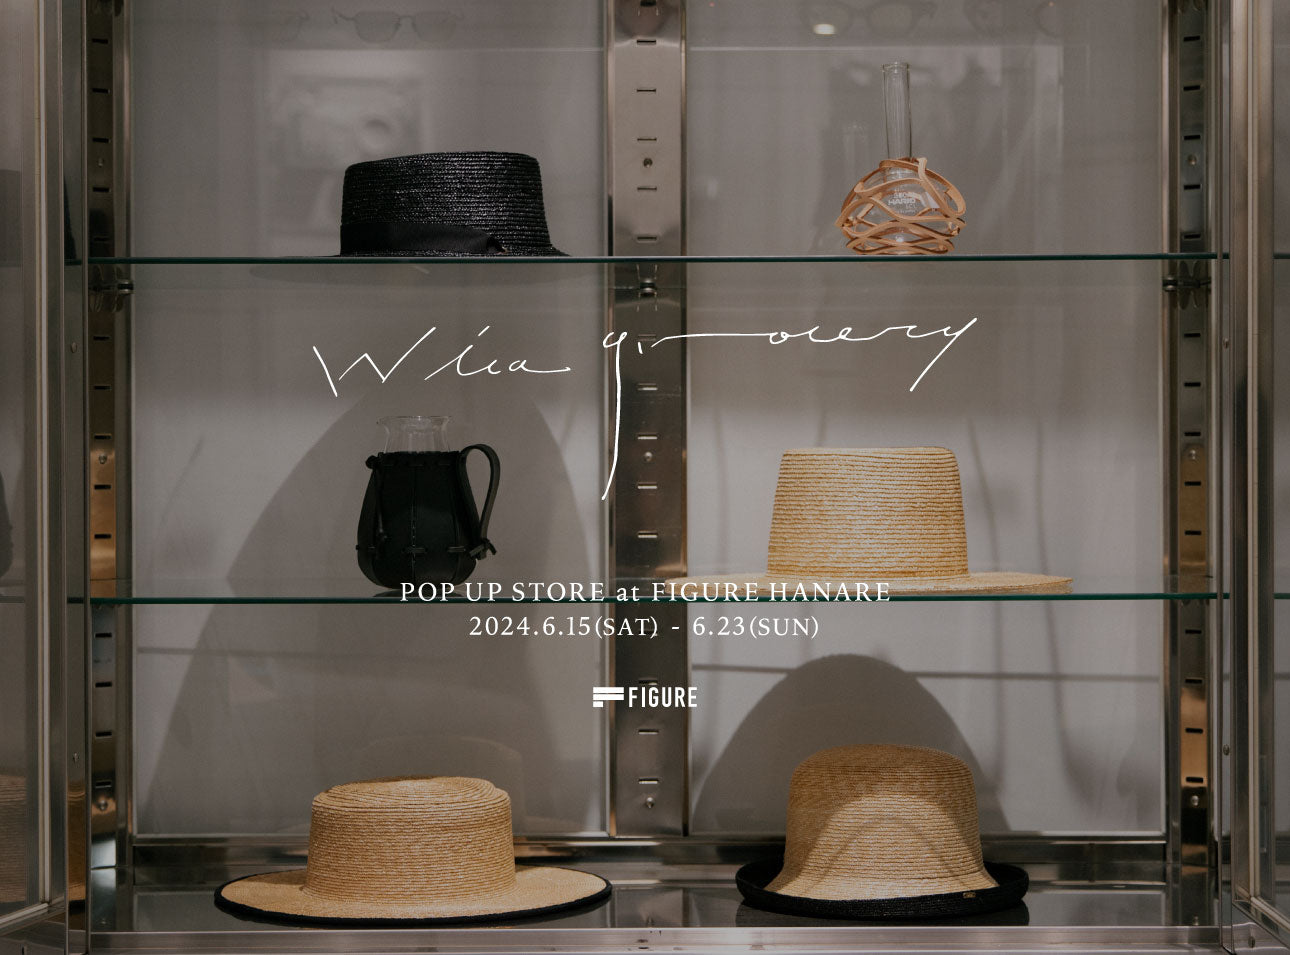 Wicagrocery POP UP STORE at FIGURE HANARE